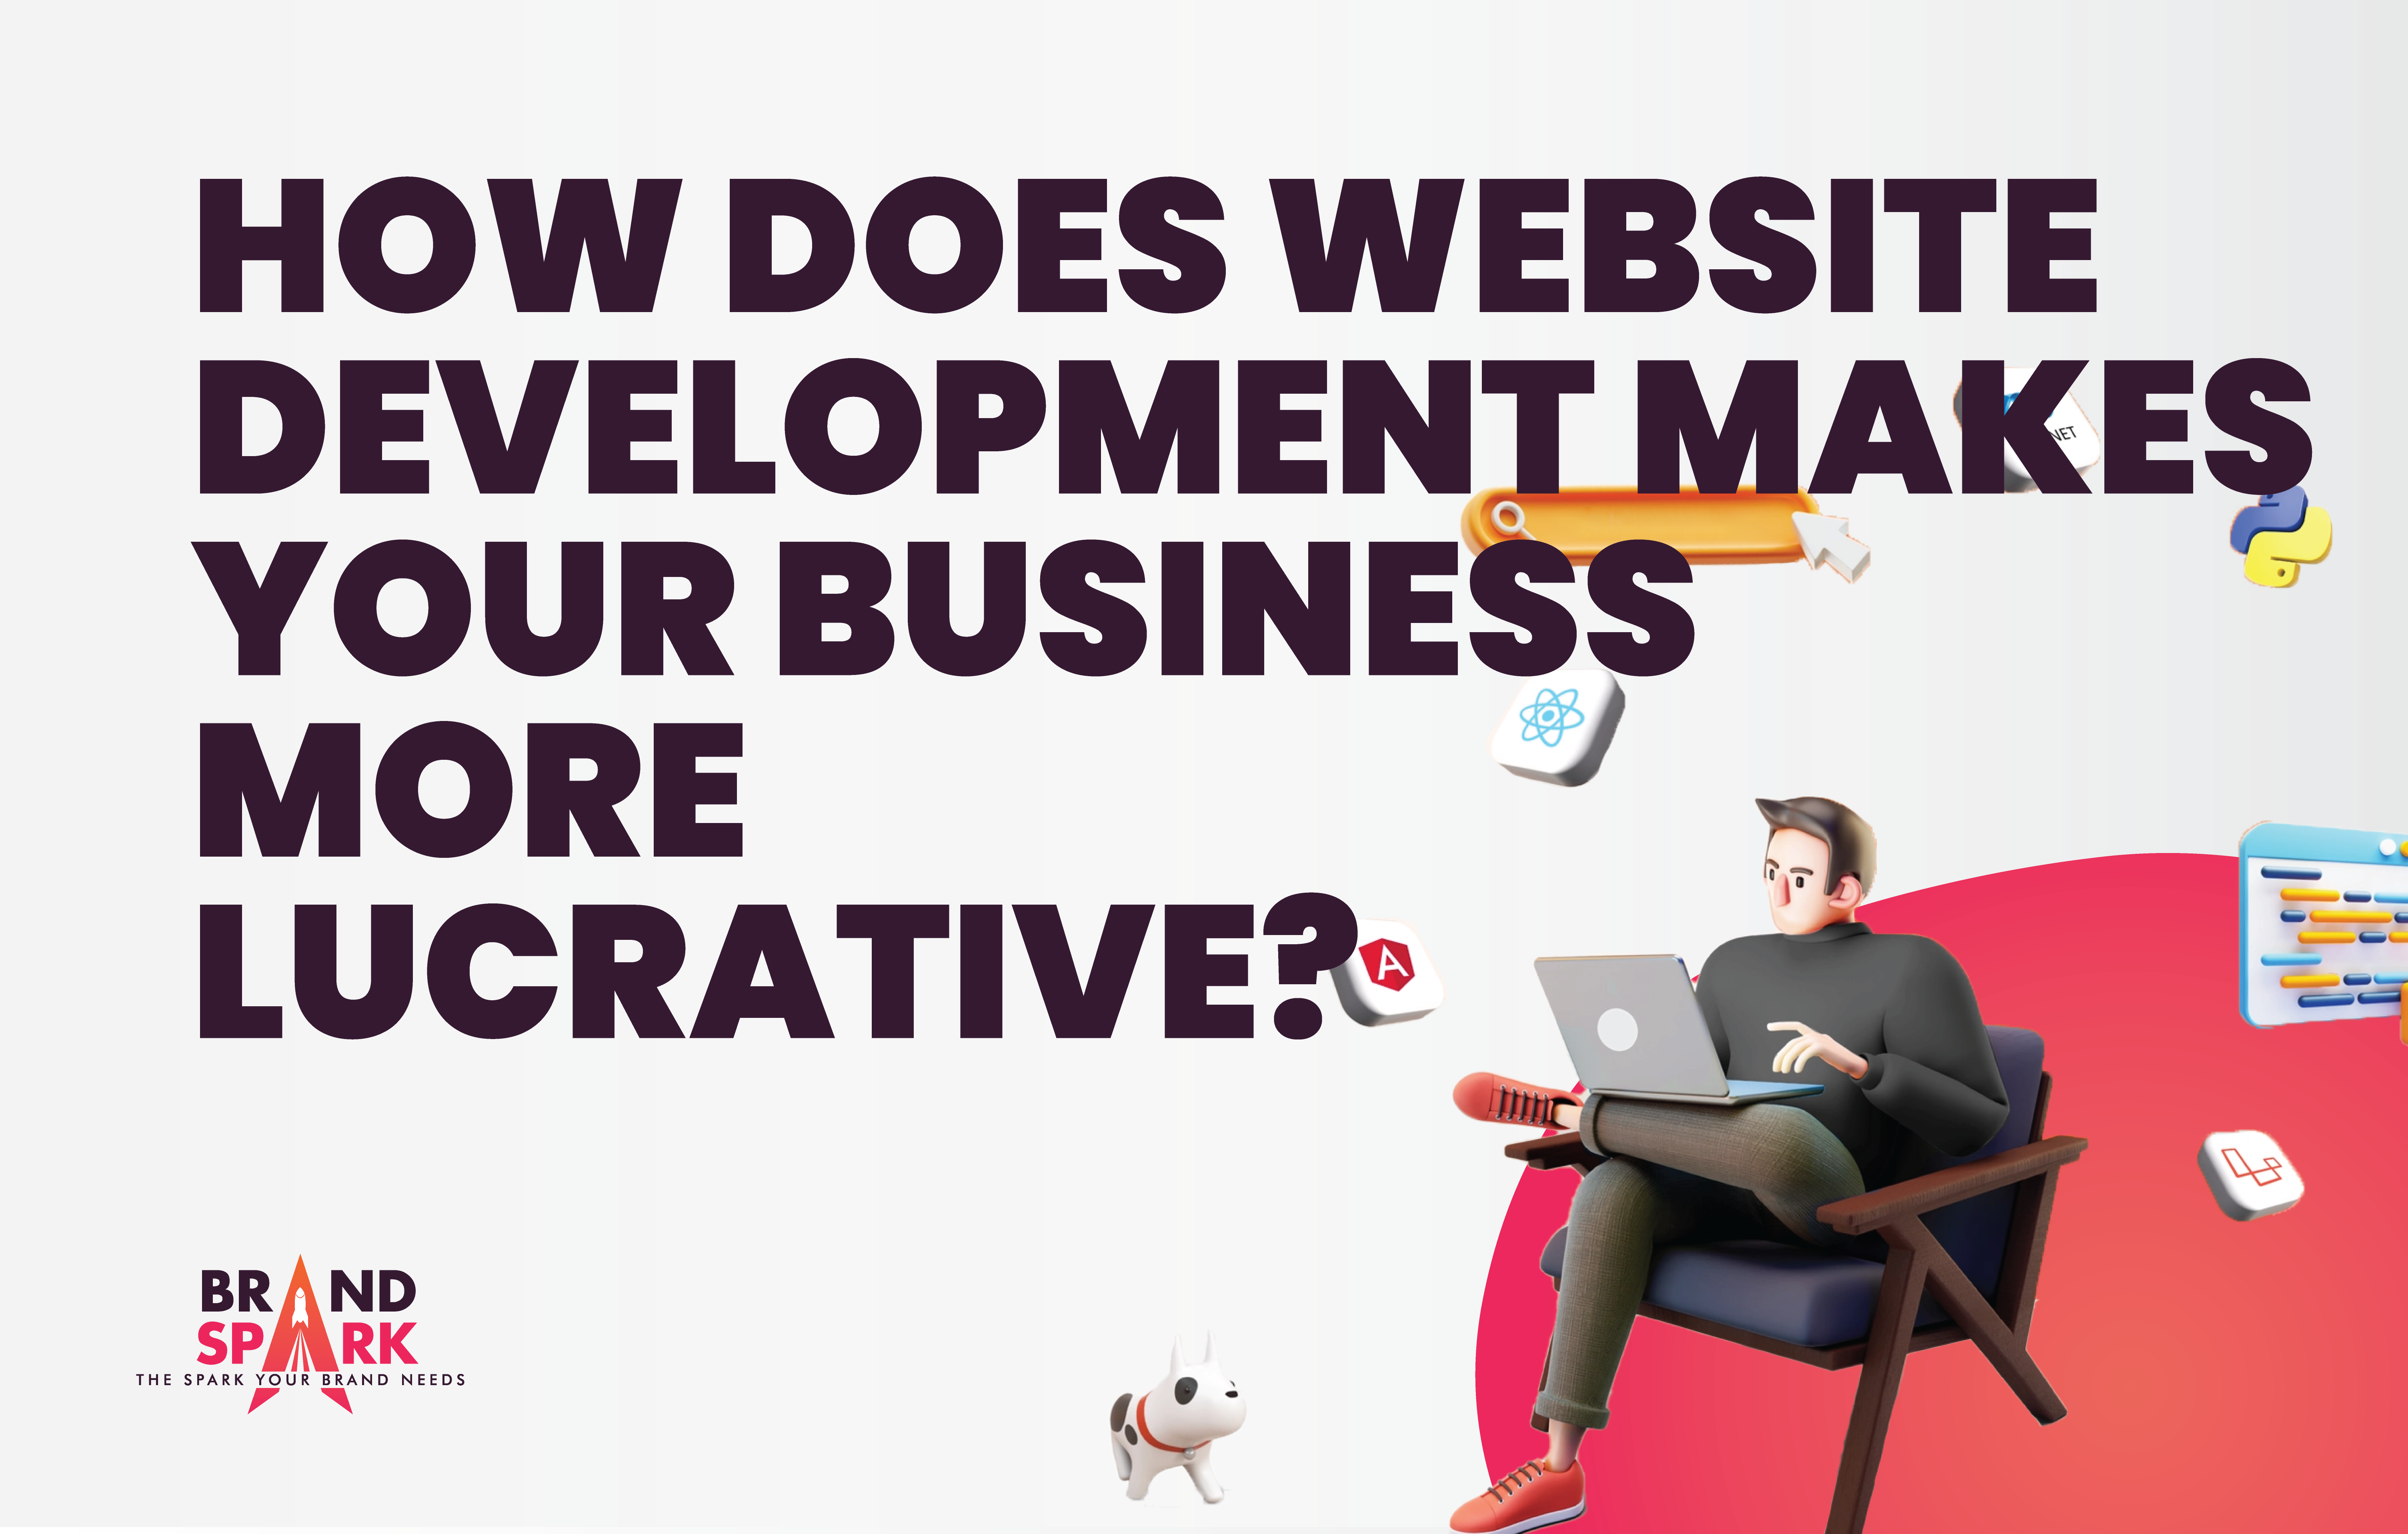 How Does Website Development Make Your Business More Lucrative?